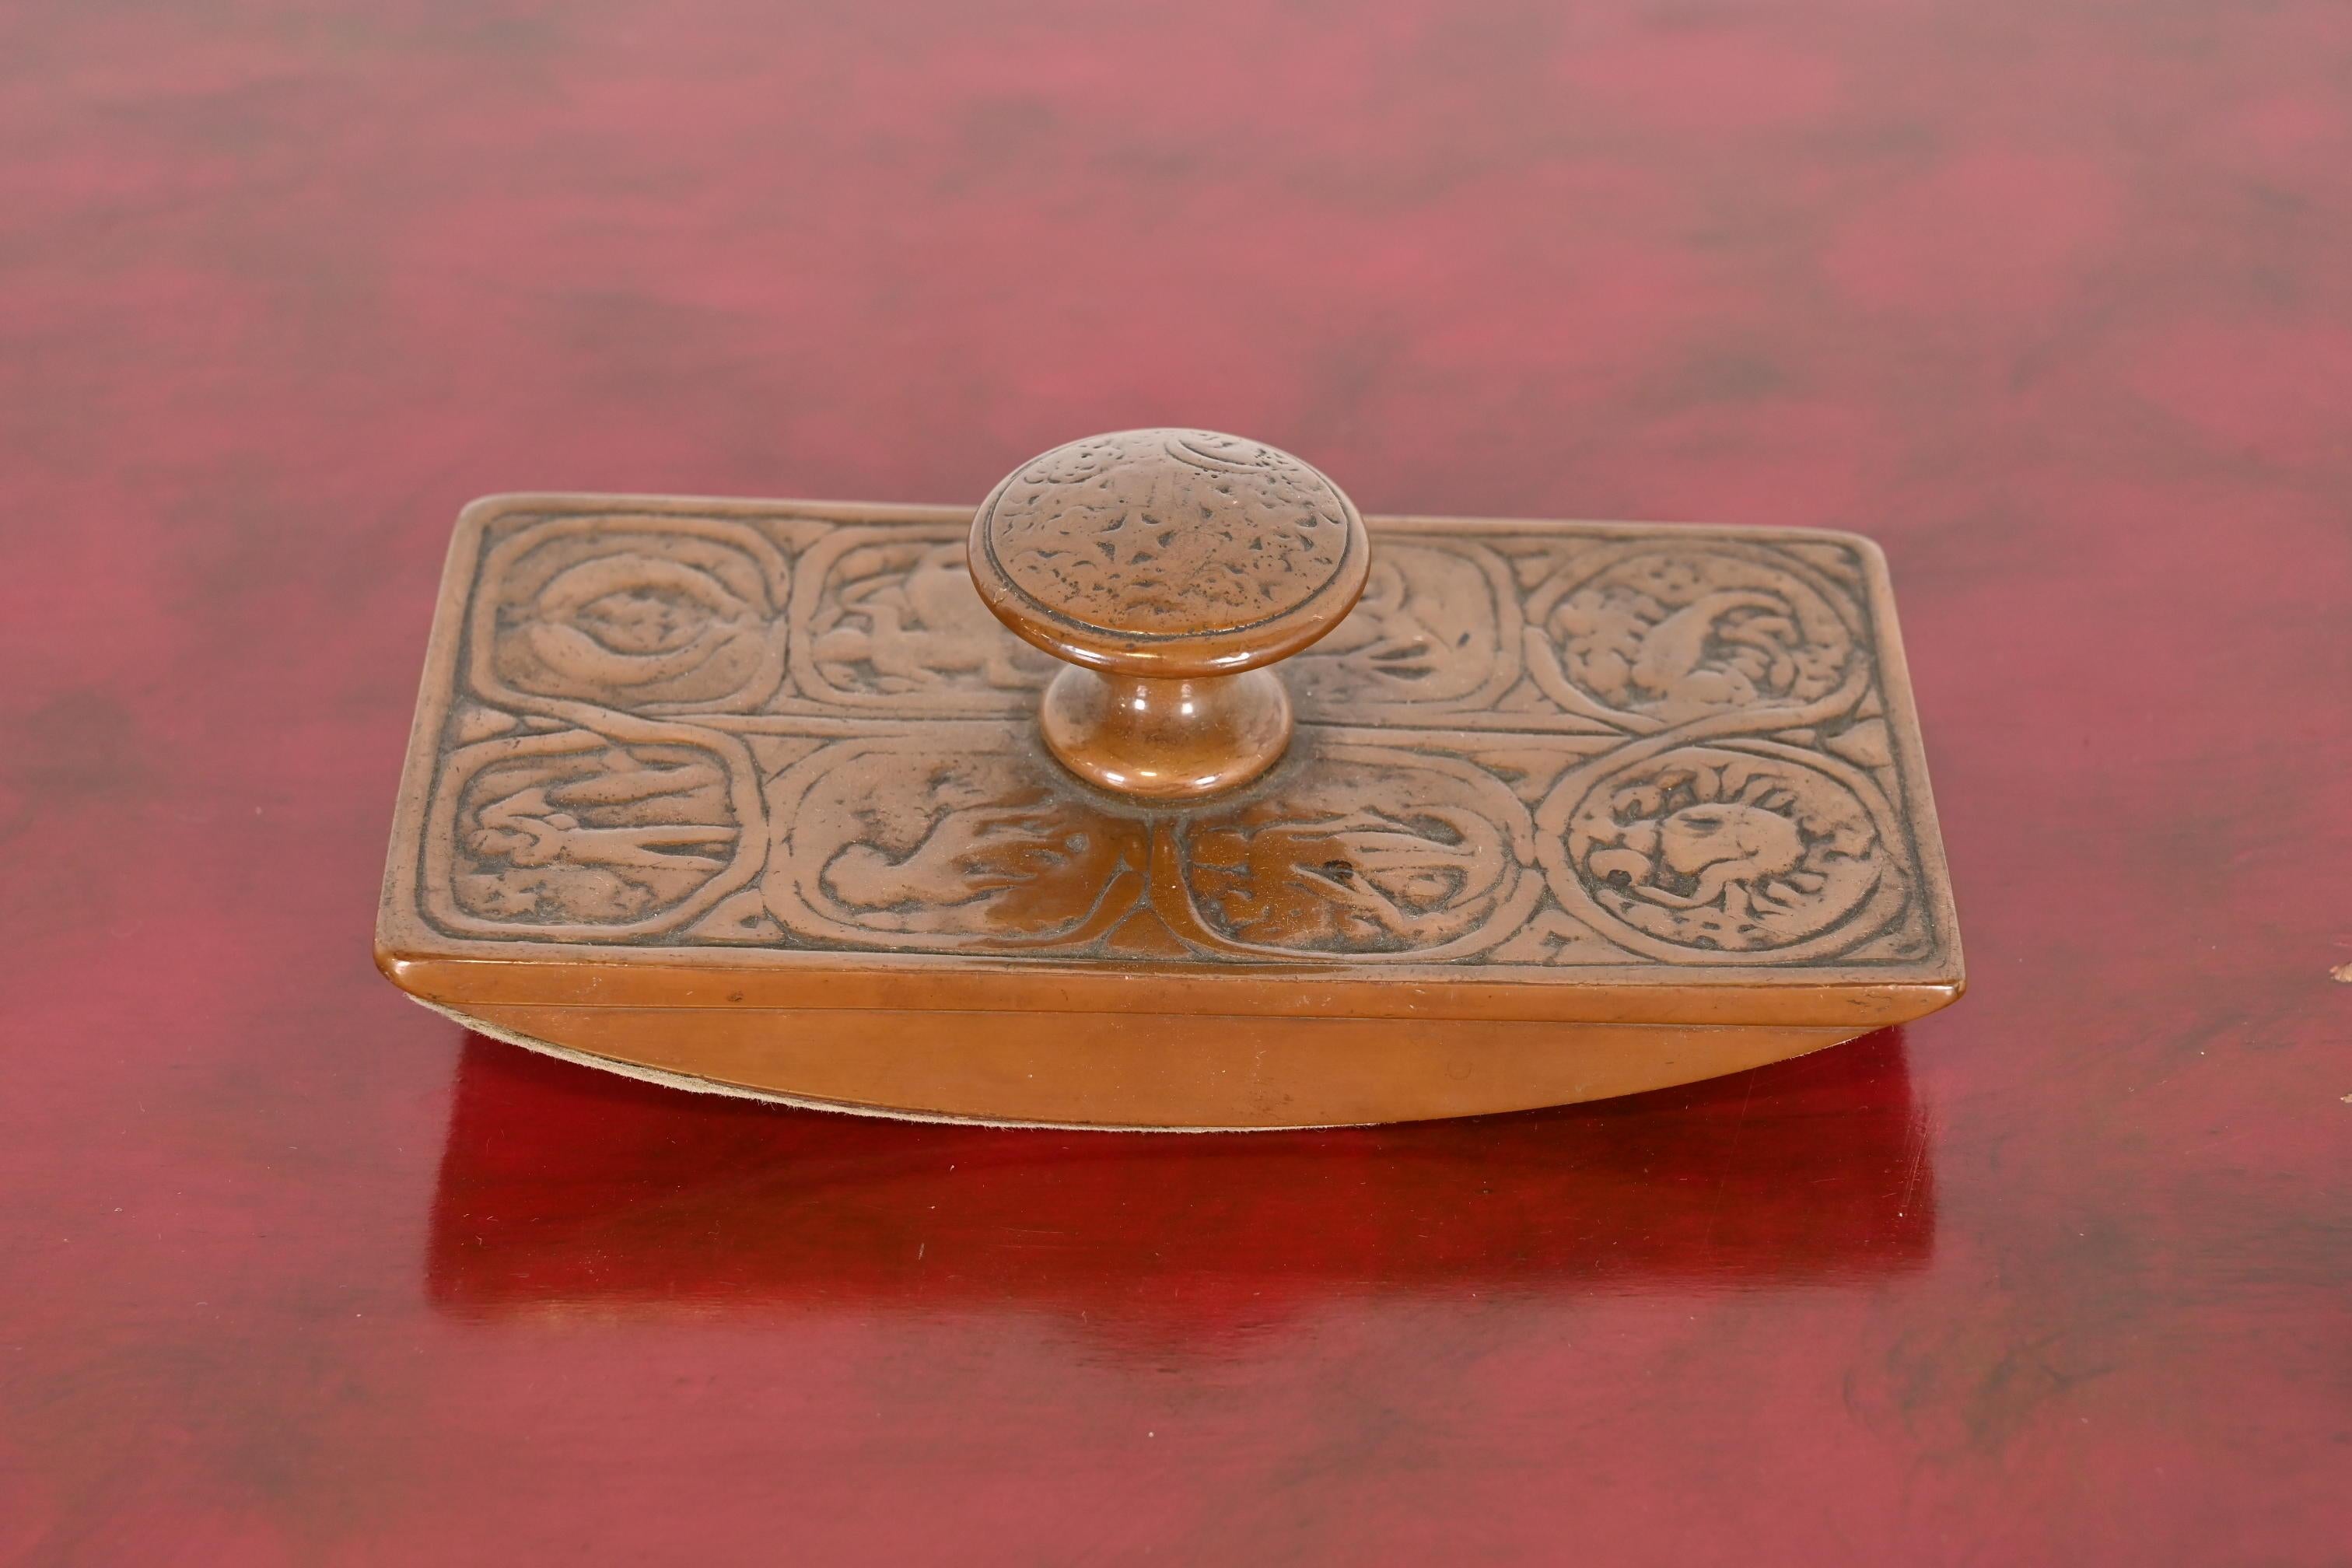 A beautiful antique bronze rocker ink blotter featuring Zodiac designs

By Tiffany Studios (signed on the side)

New York, USA, Early 20th Century

Measures: 6